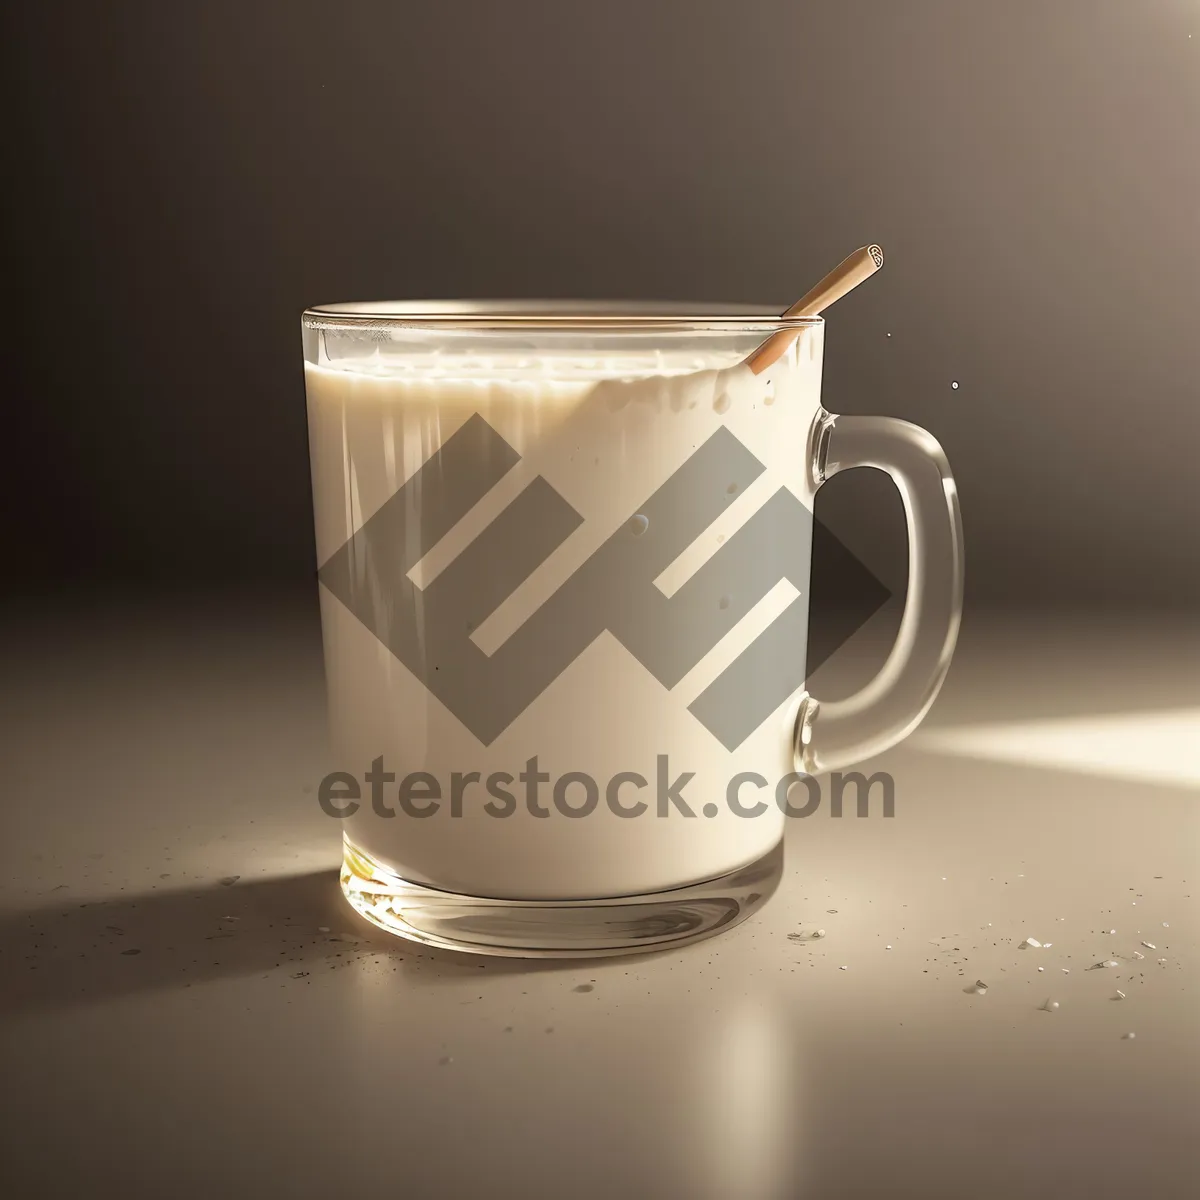 Picture of Frothy Caffeinated Morning Beverage on Saucer